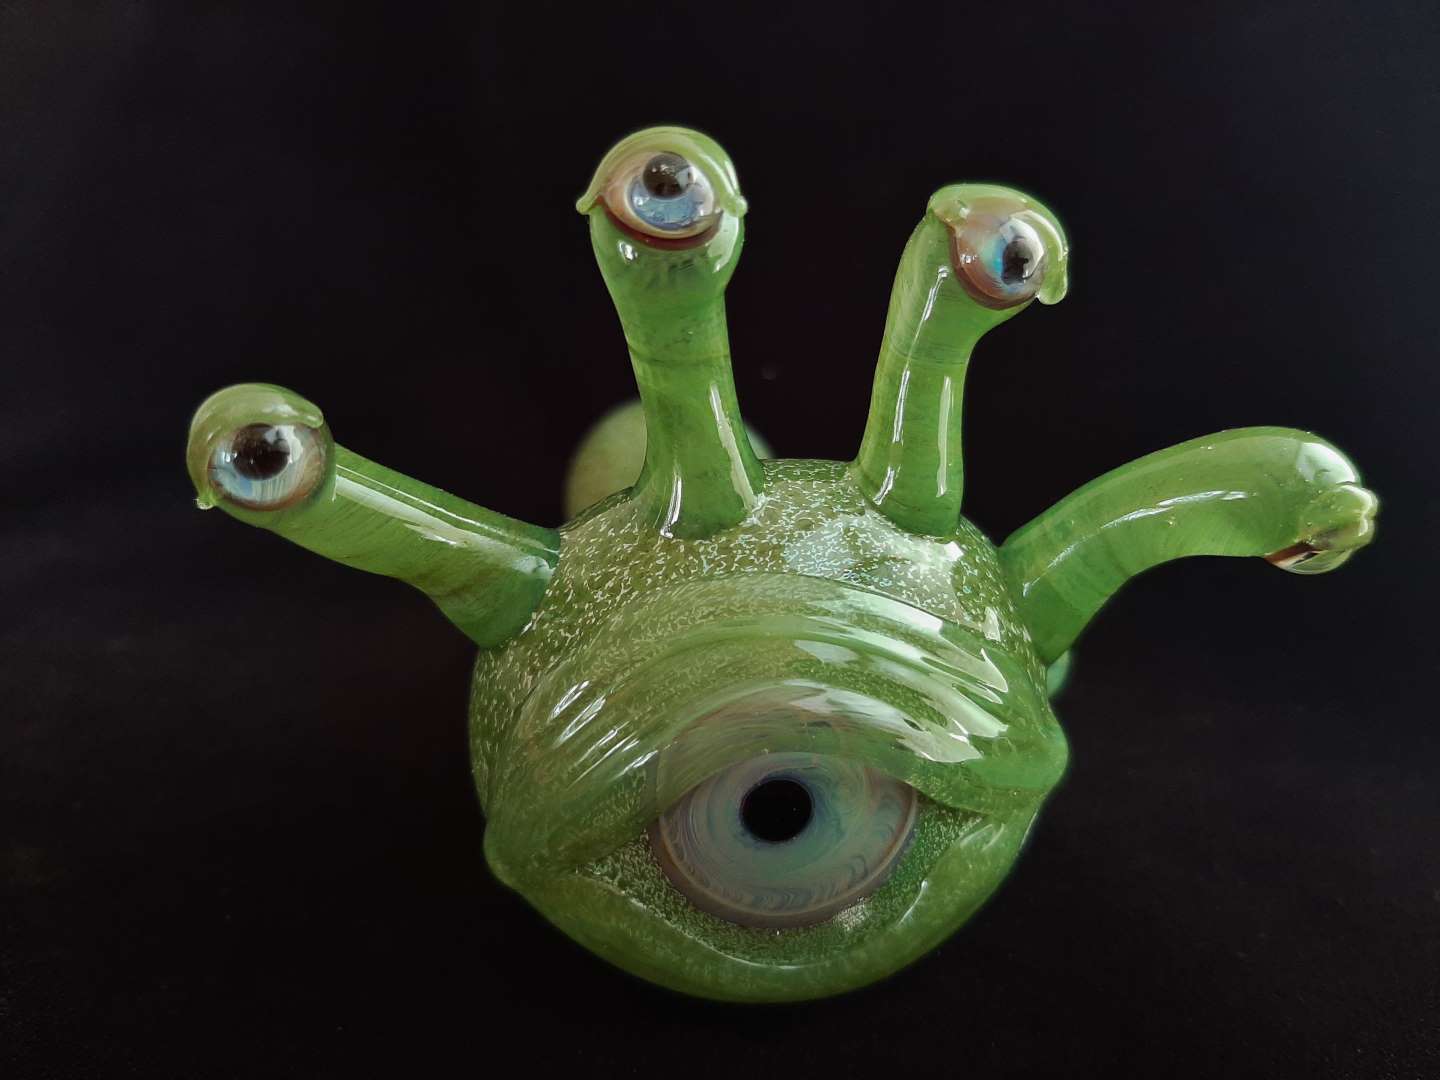 Glass beholder pipe. Five eyes and a spooky look.